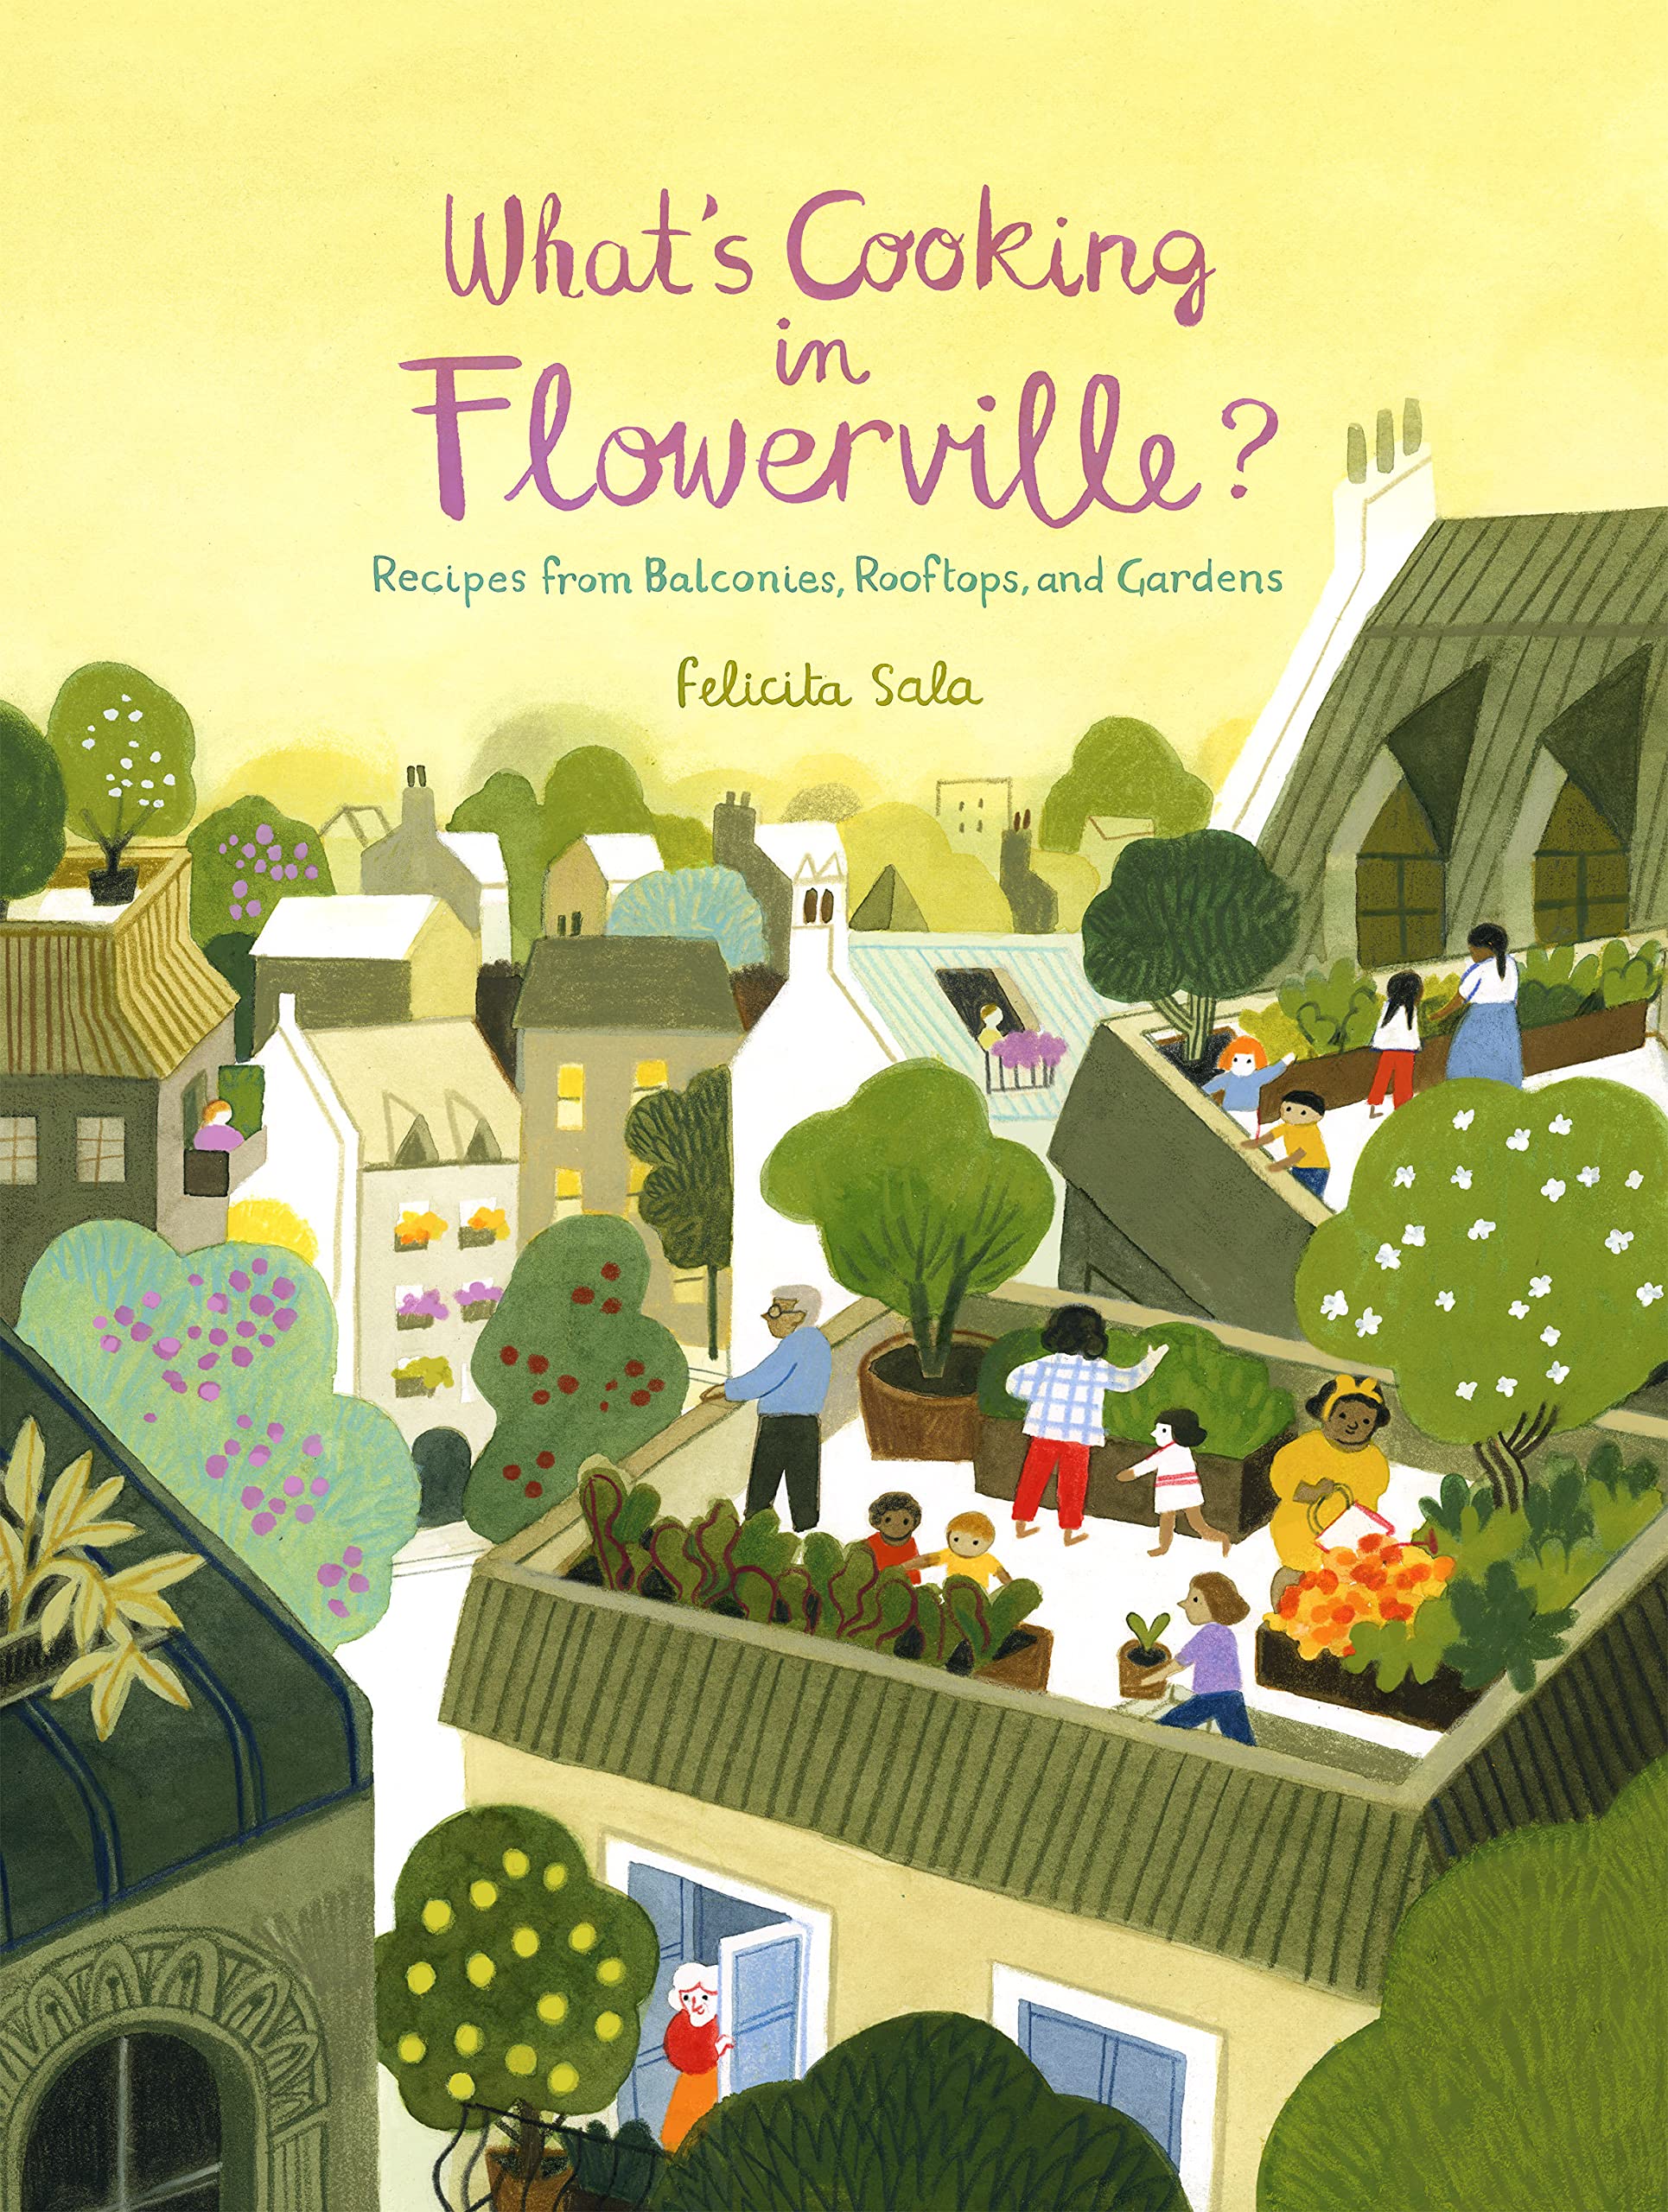 What's Cooking in Flowerville? Recipes from Balconies, Rooftops, and Gardens (Felicita Sala)